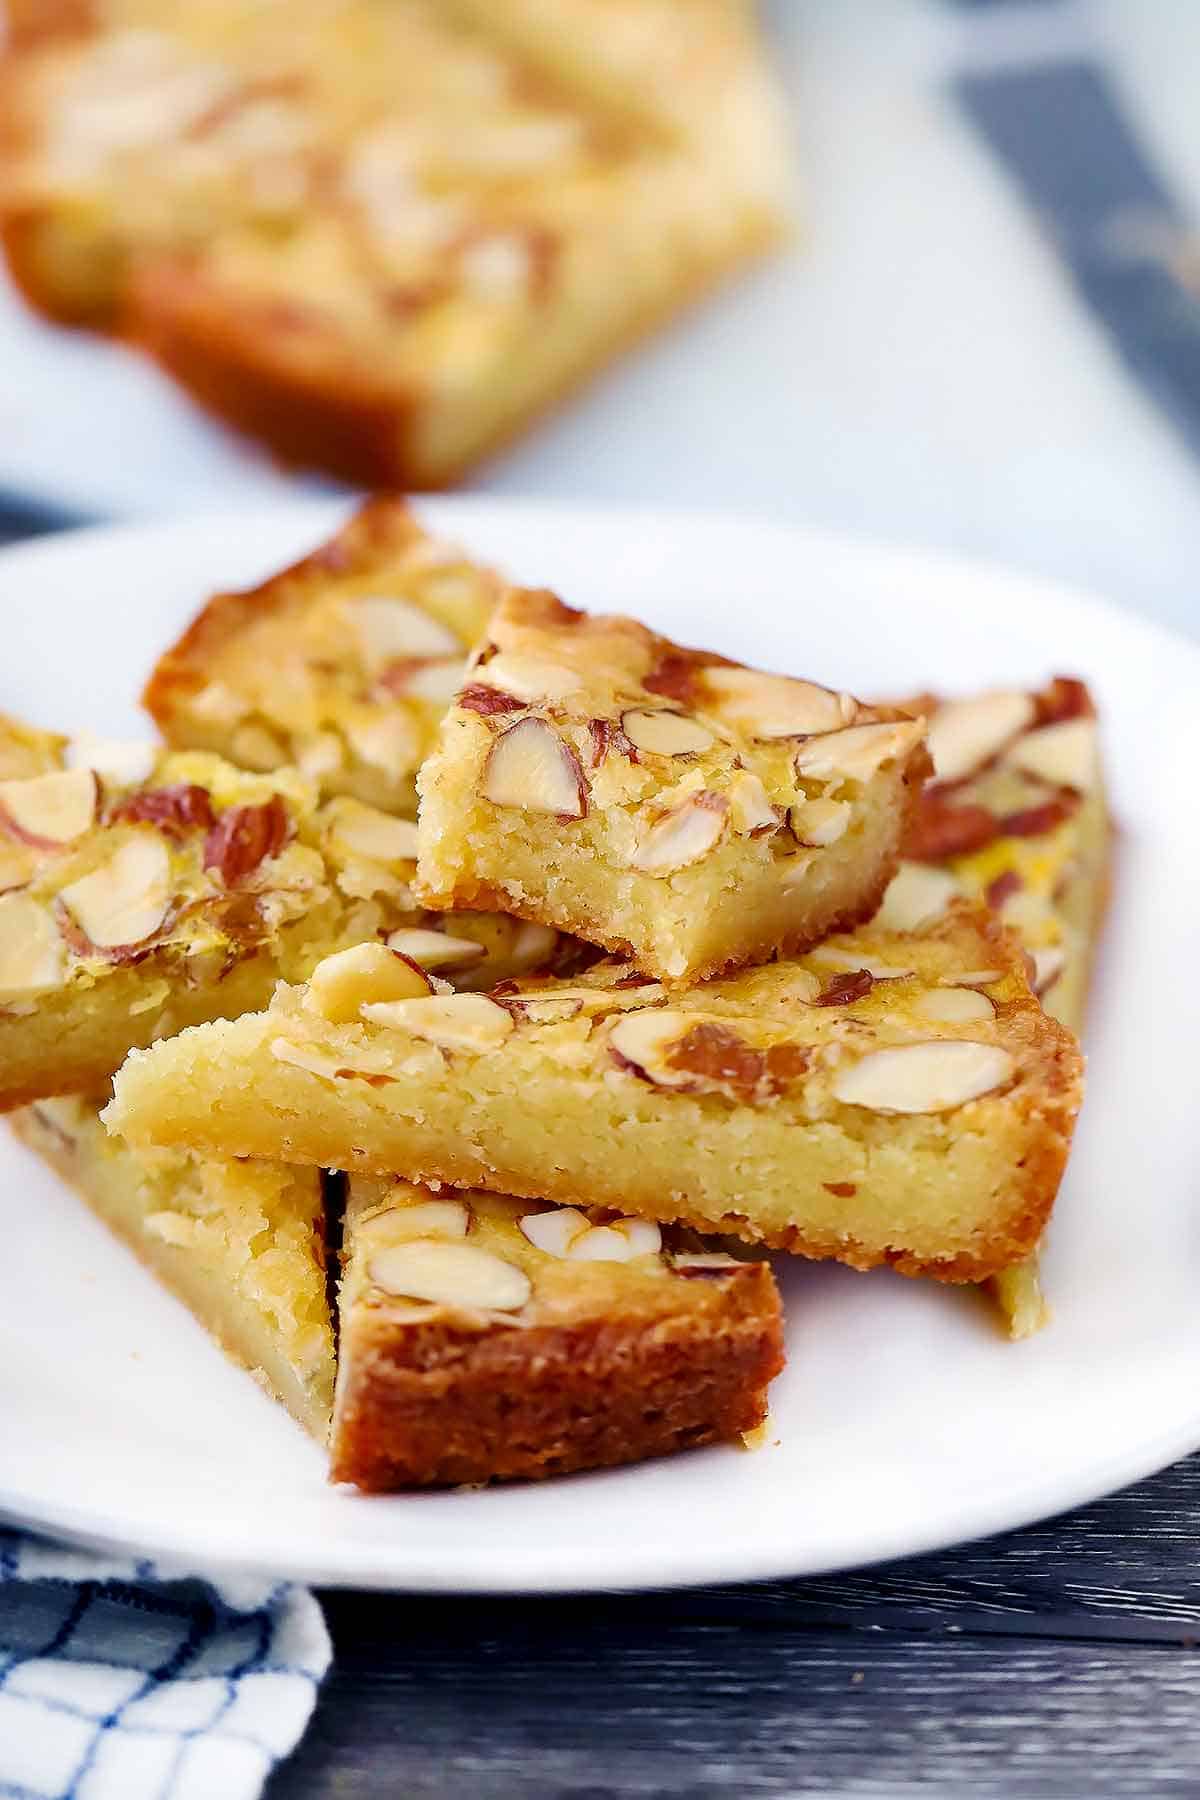 A plate with triangles of Dutch Butter Cake, or boterkoek, with a bite taken out of one.